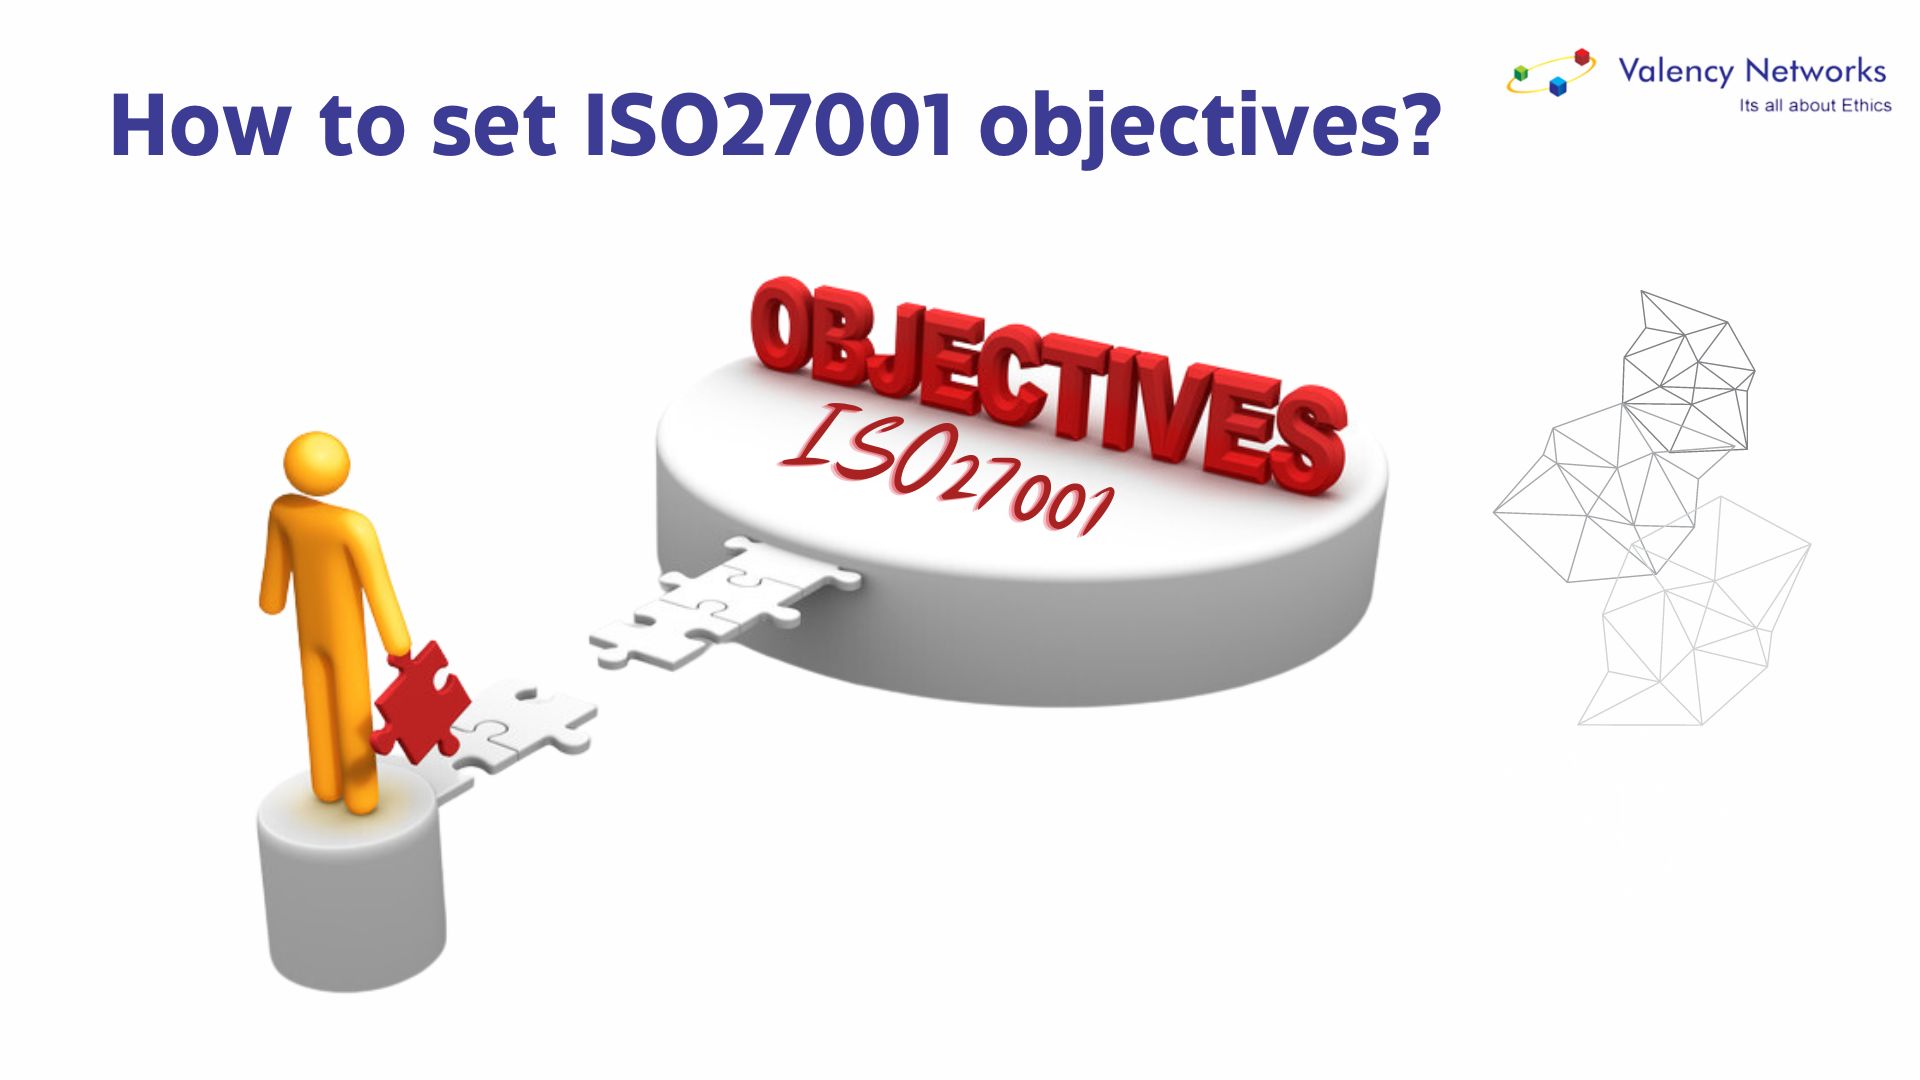 How to set ISO27001 objectives?